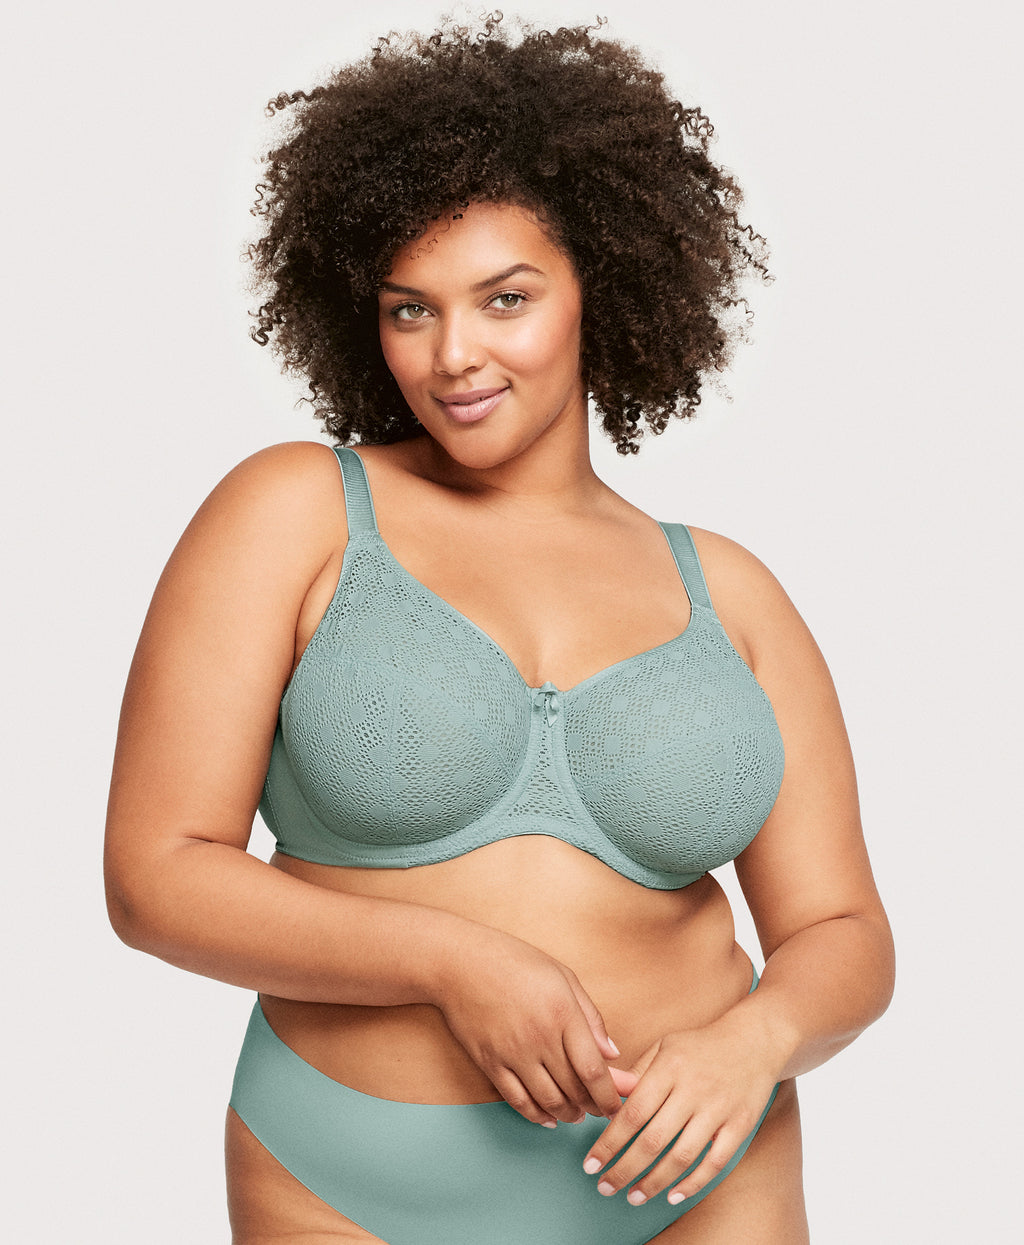 bra review - GODDESS Adelaide size 40, cup O 